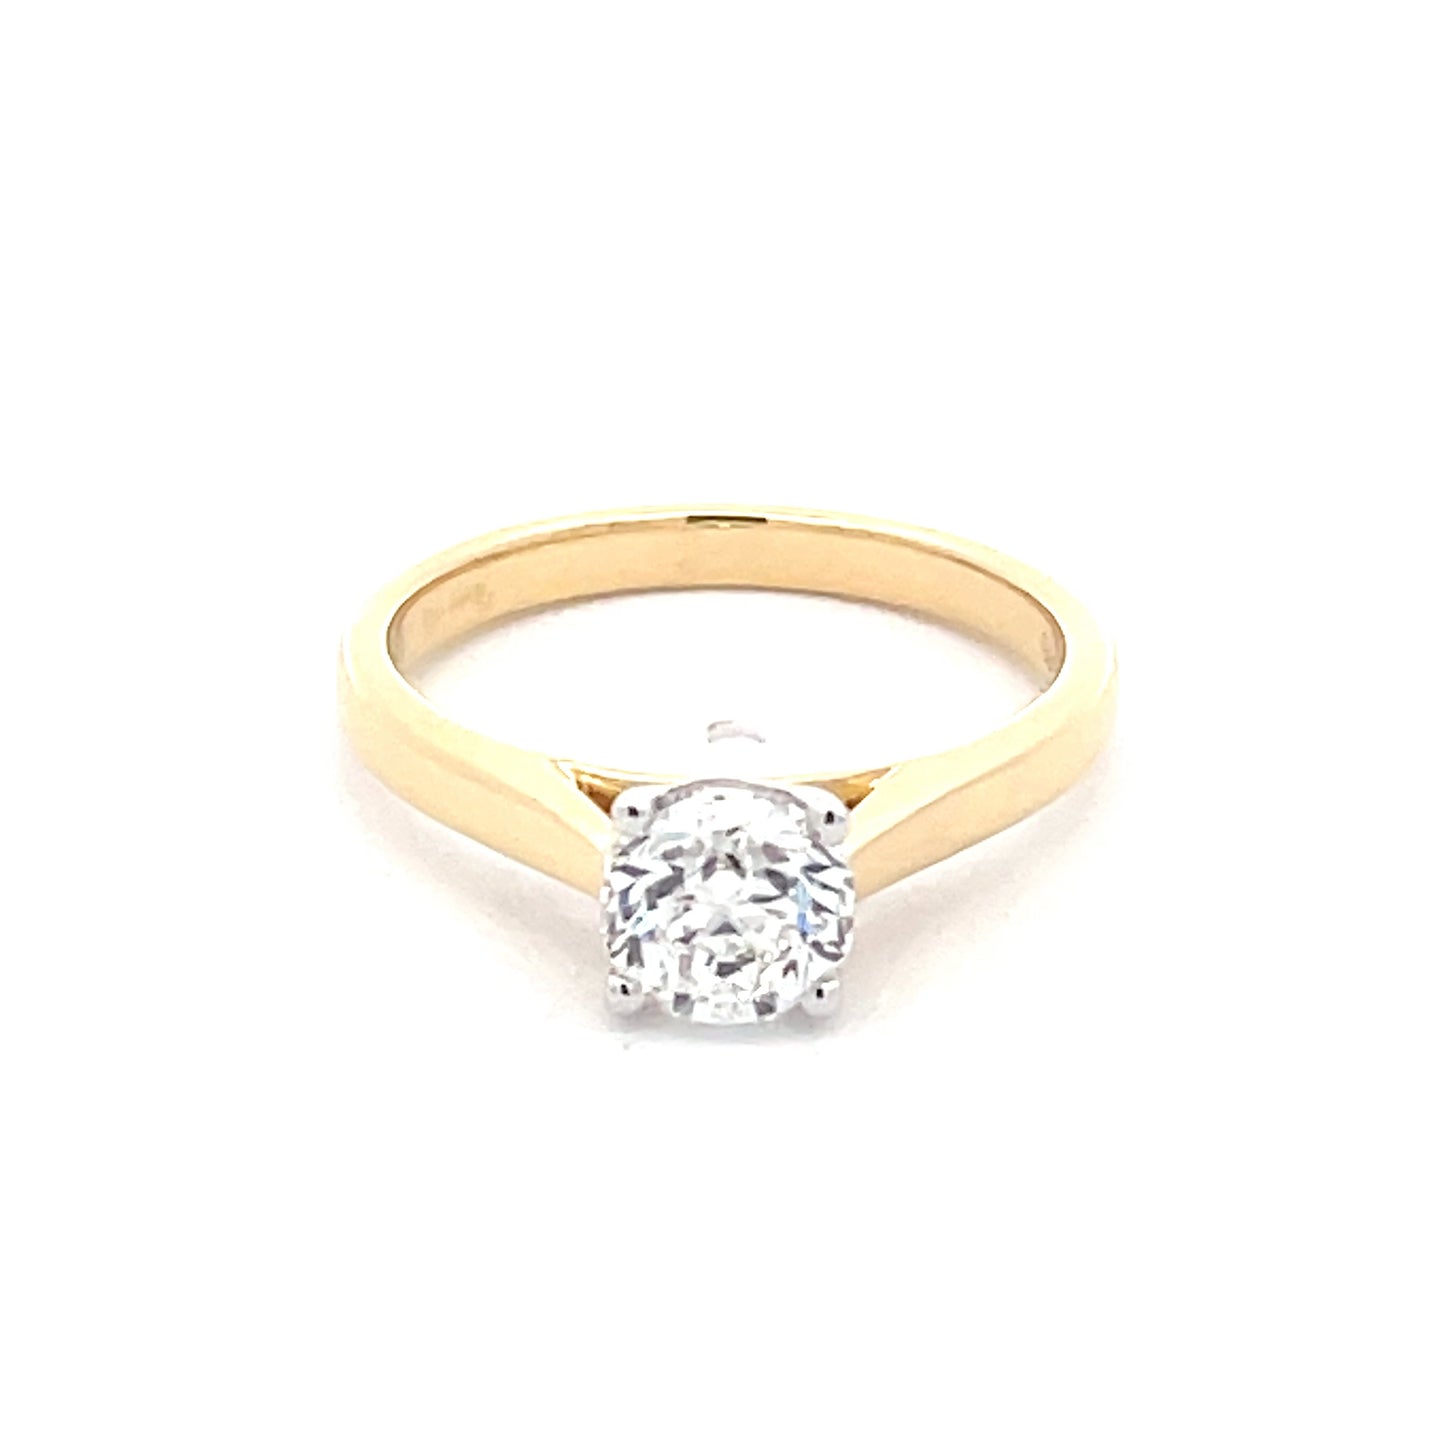 ROUND BRILLIANT CUT DIAMOND SOLITAIRE RING - 1.00CTS  Gardiner Brothers   